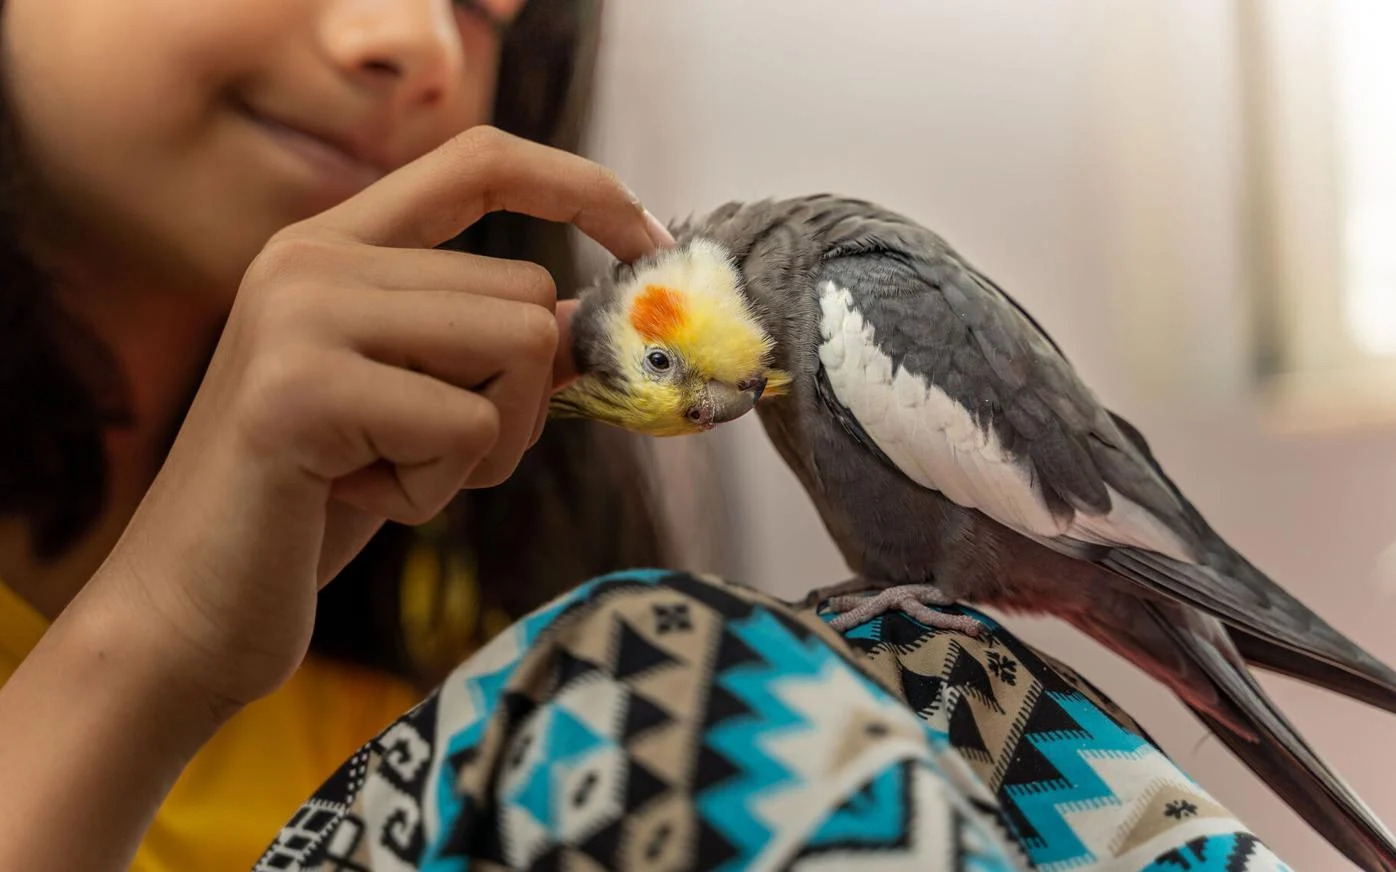 Frequently Asked Questions About Pet Birds